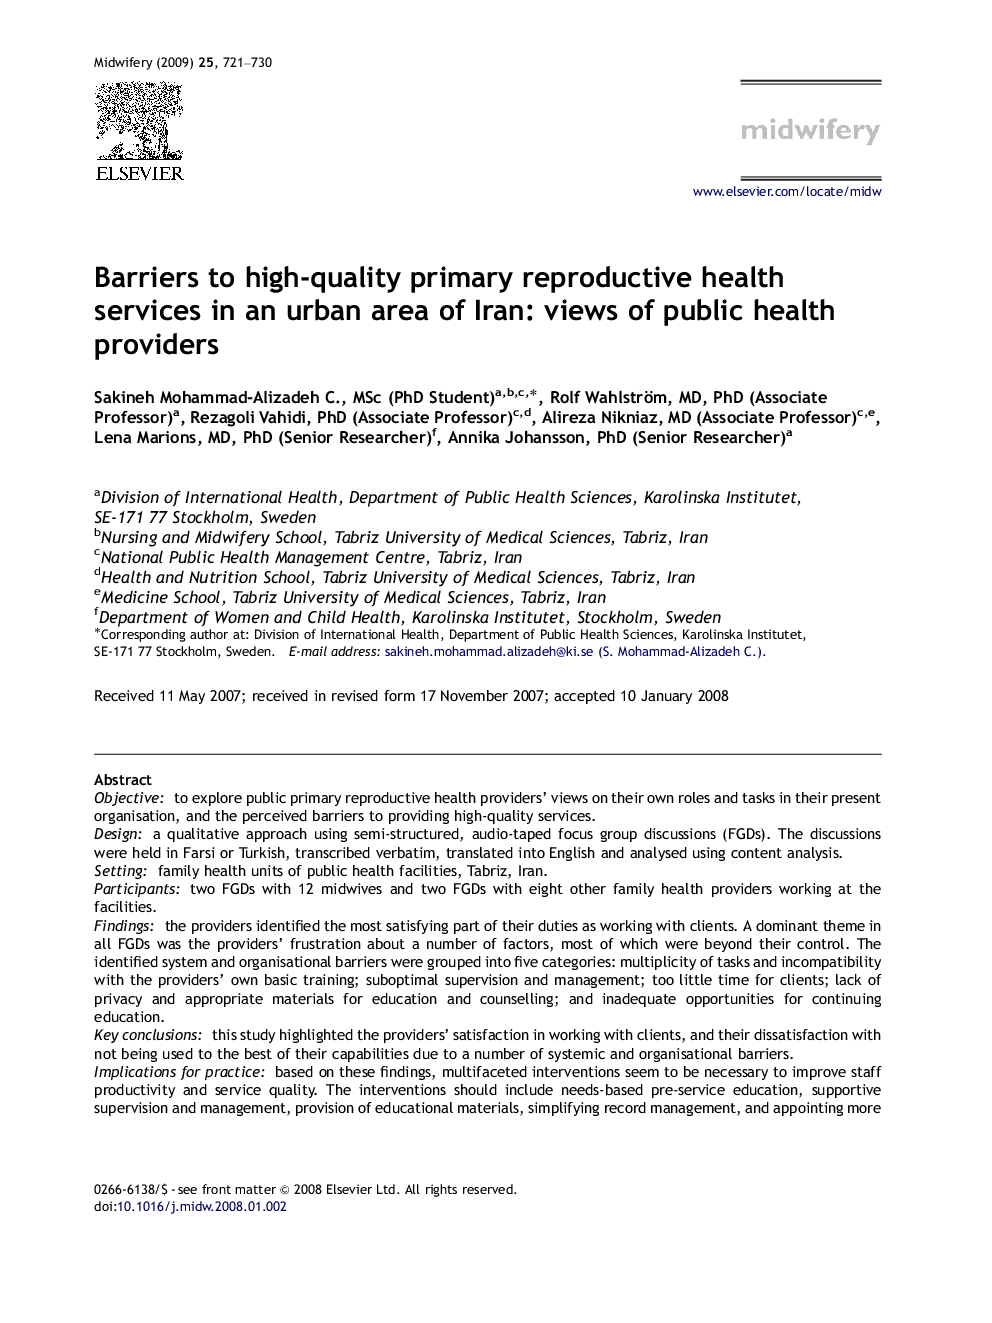 Barriers to high-quality primary reproductive health services in an urban area of Iran: views of public health providers